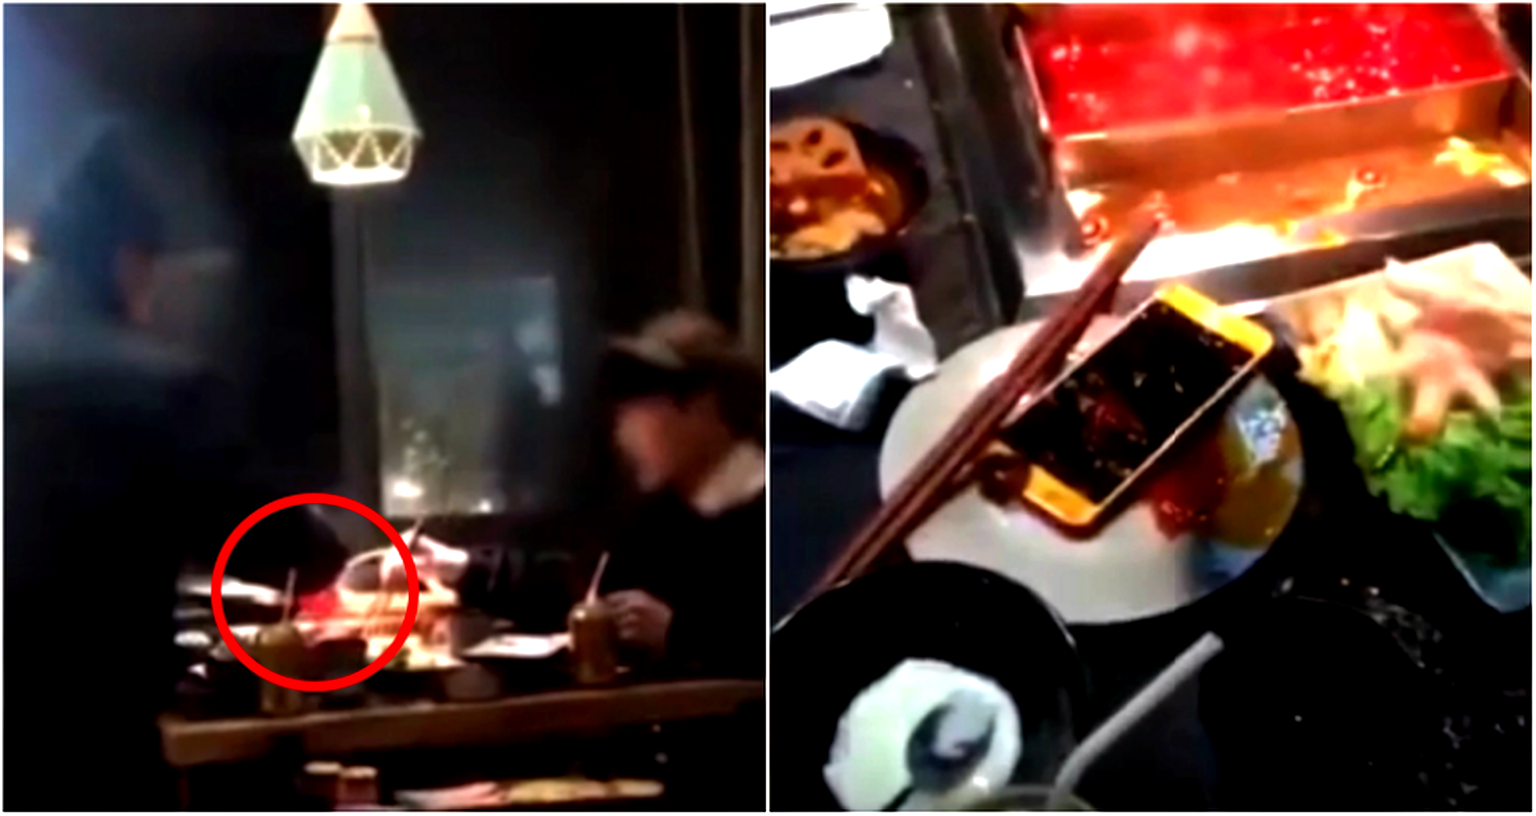 Man Keeps Checking Phone During Date, Angry Woman Throws it into Boiling Hot Pot